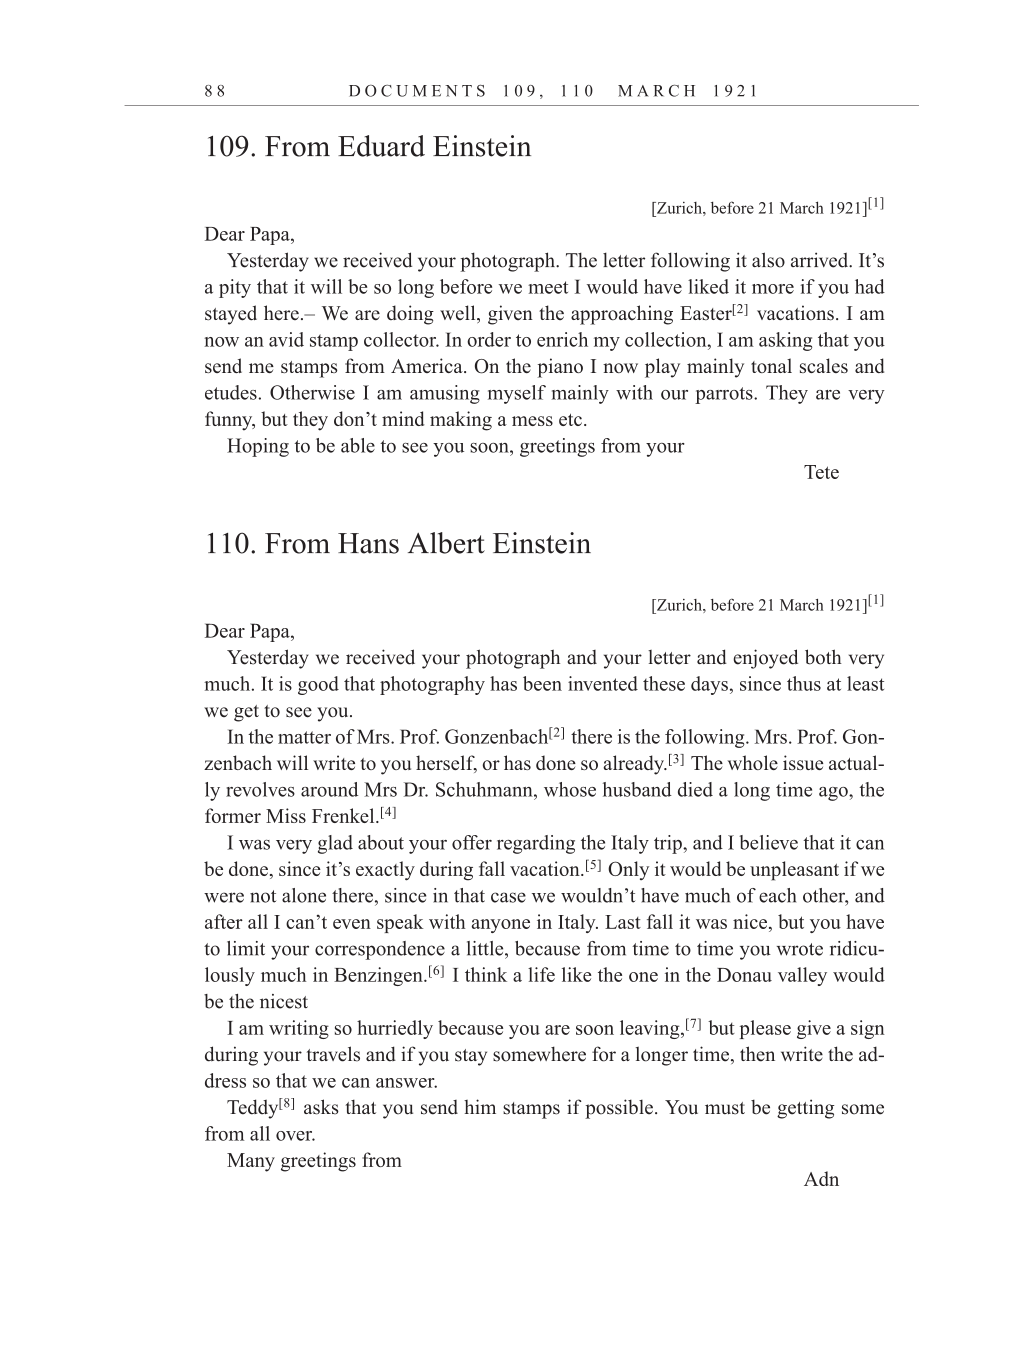 Volume 12: The Berlin Years: Correspondence, January-December 1921 (English translation supplement) page 88